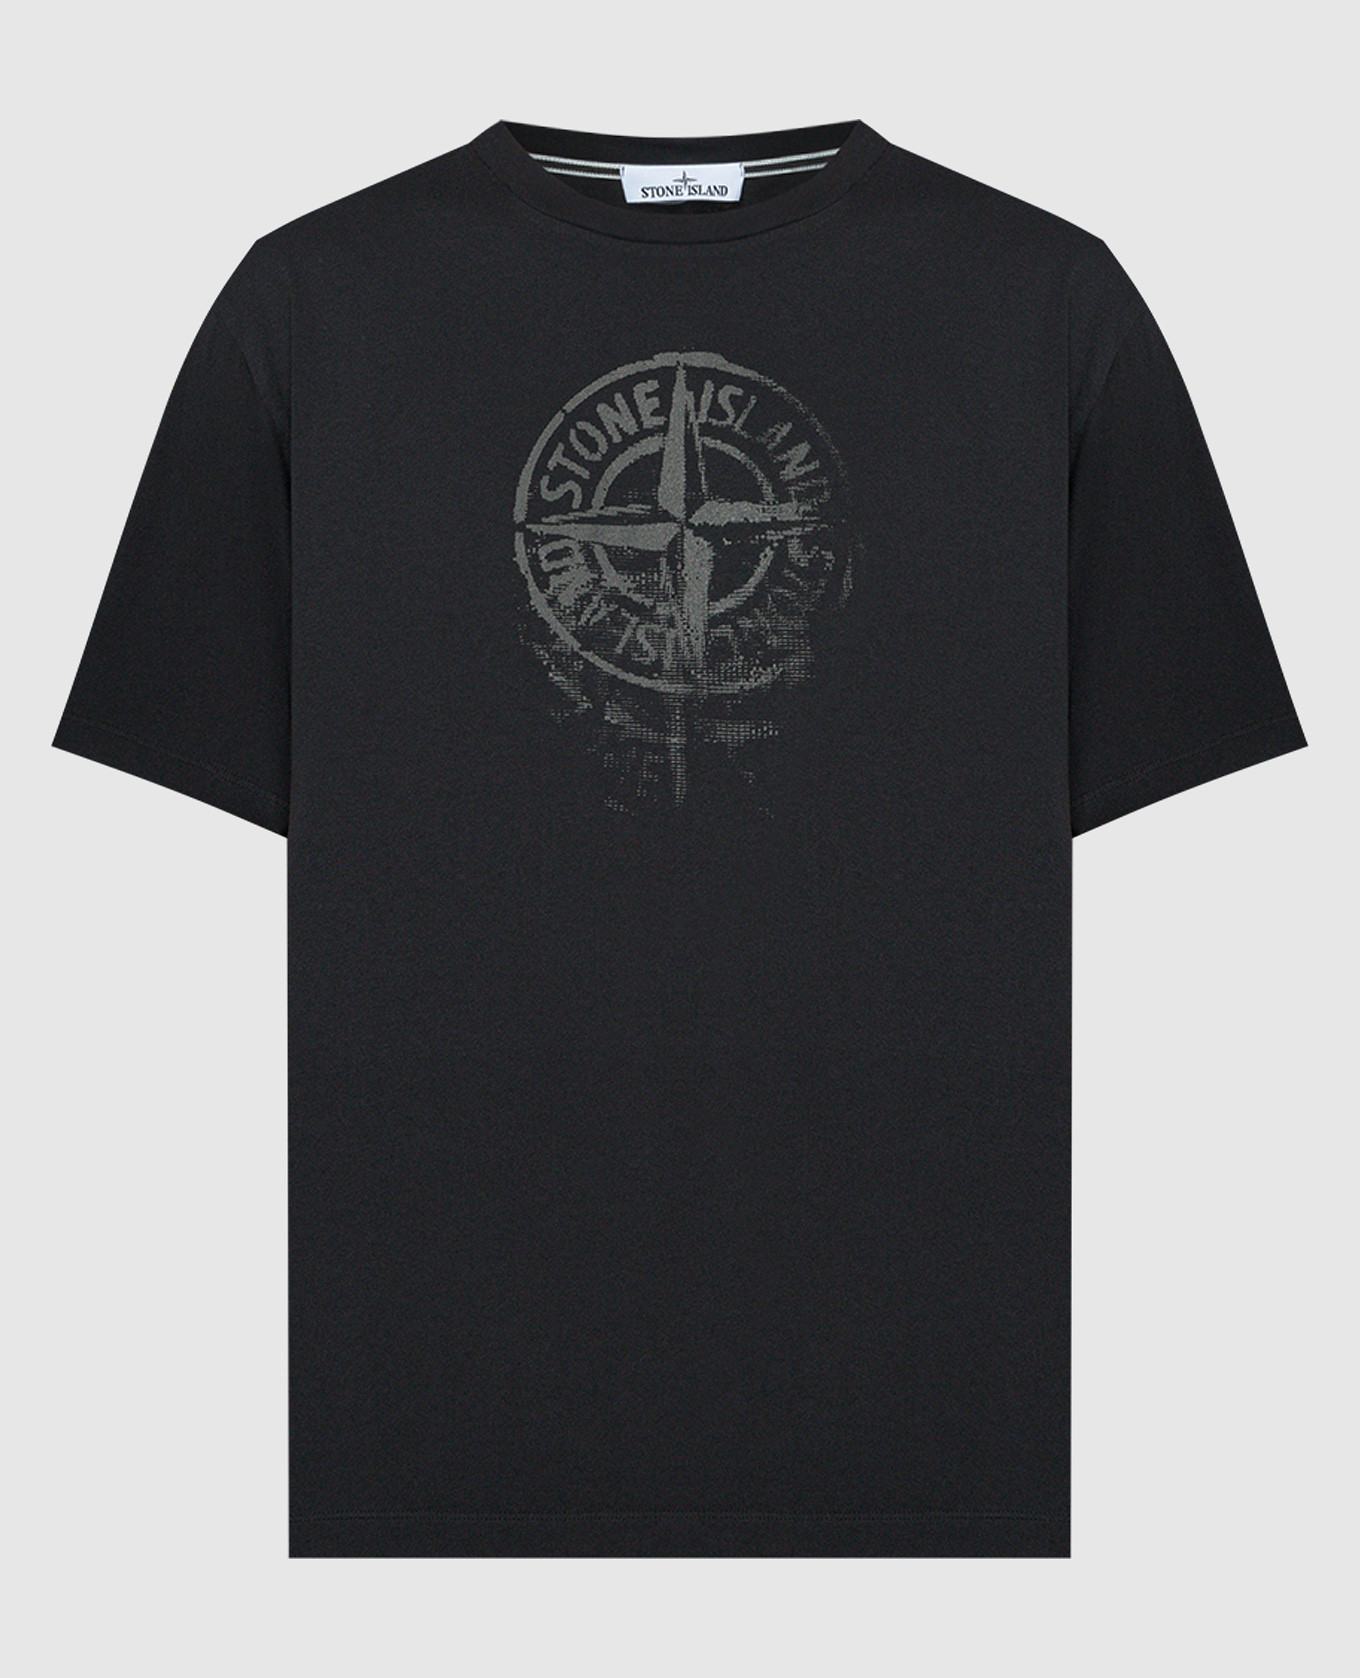 Black t-shirt with Stamp One print